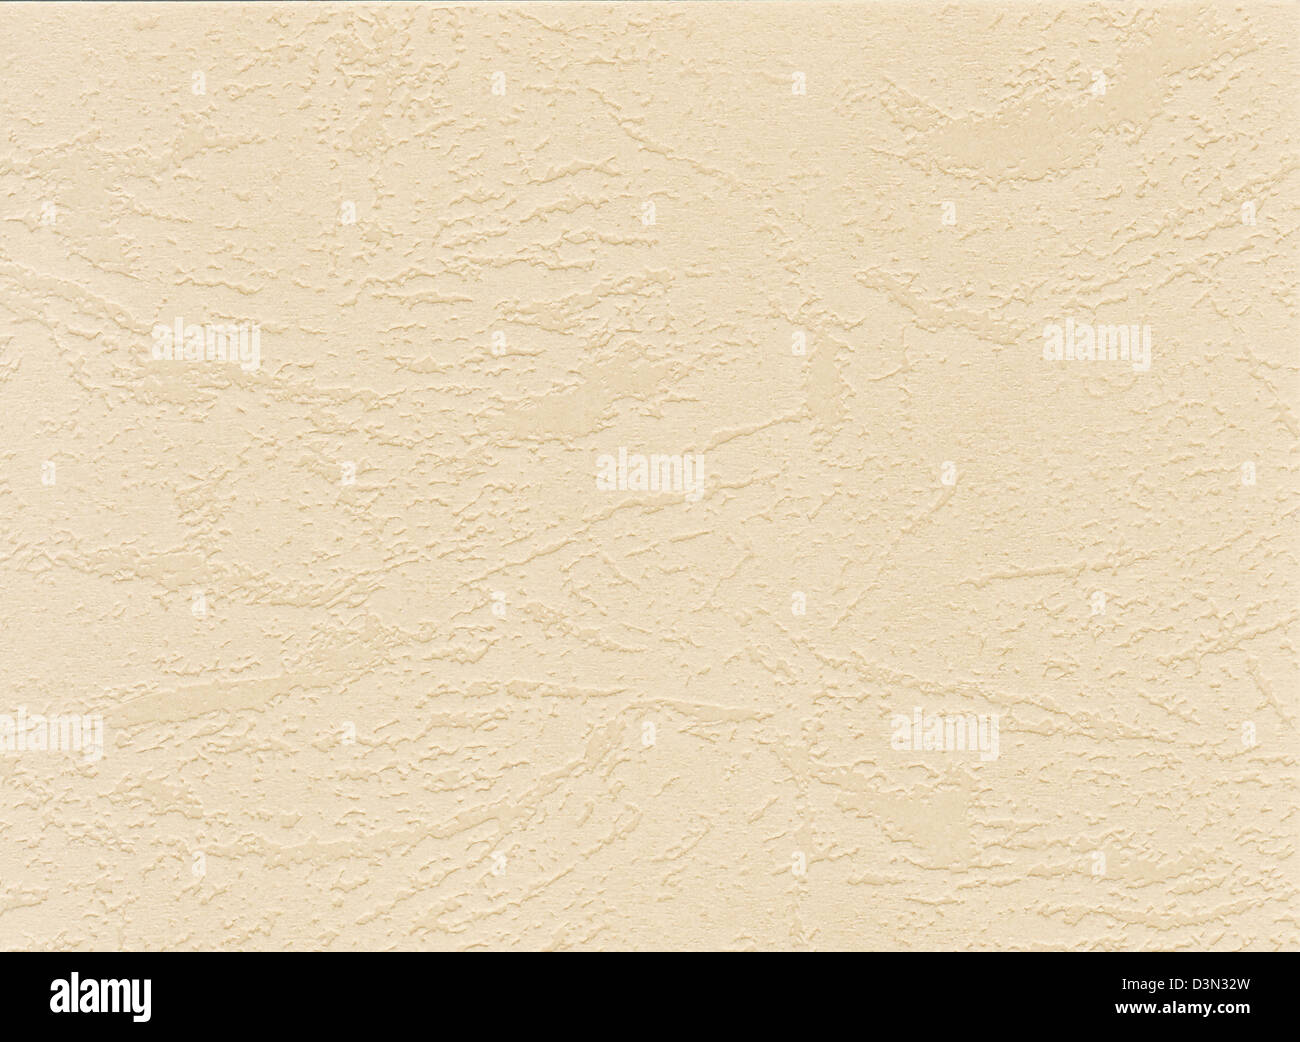 Paper Texture.  A sheet of of textured beige paper suitable for a variety of backgrounds. Stock Photo